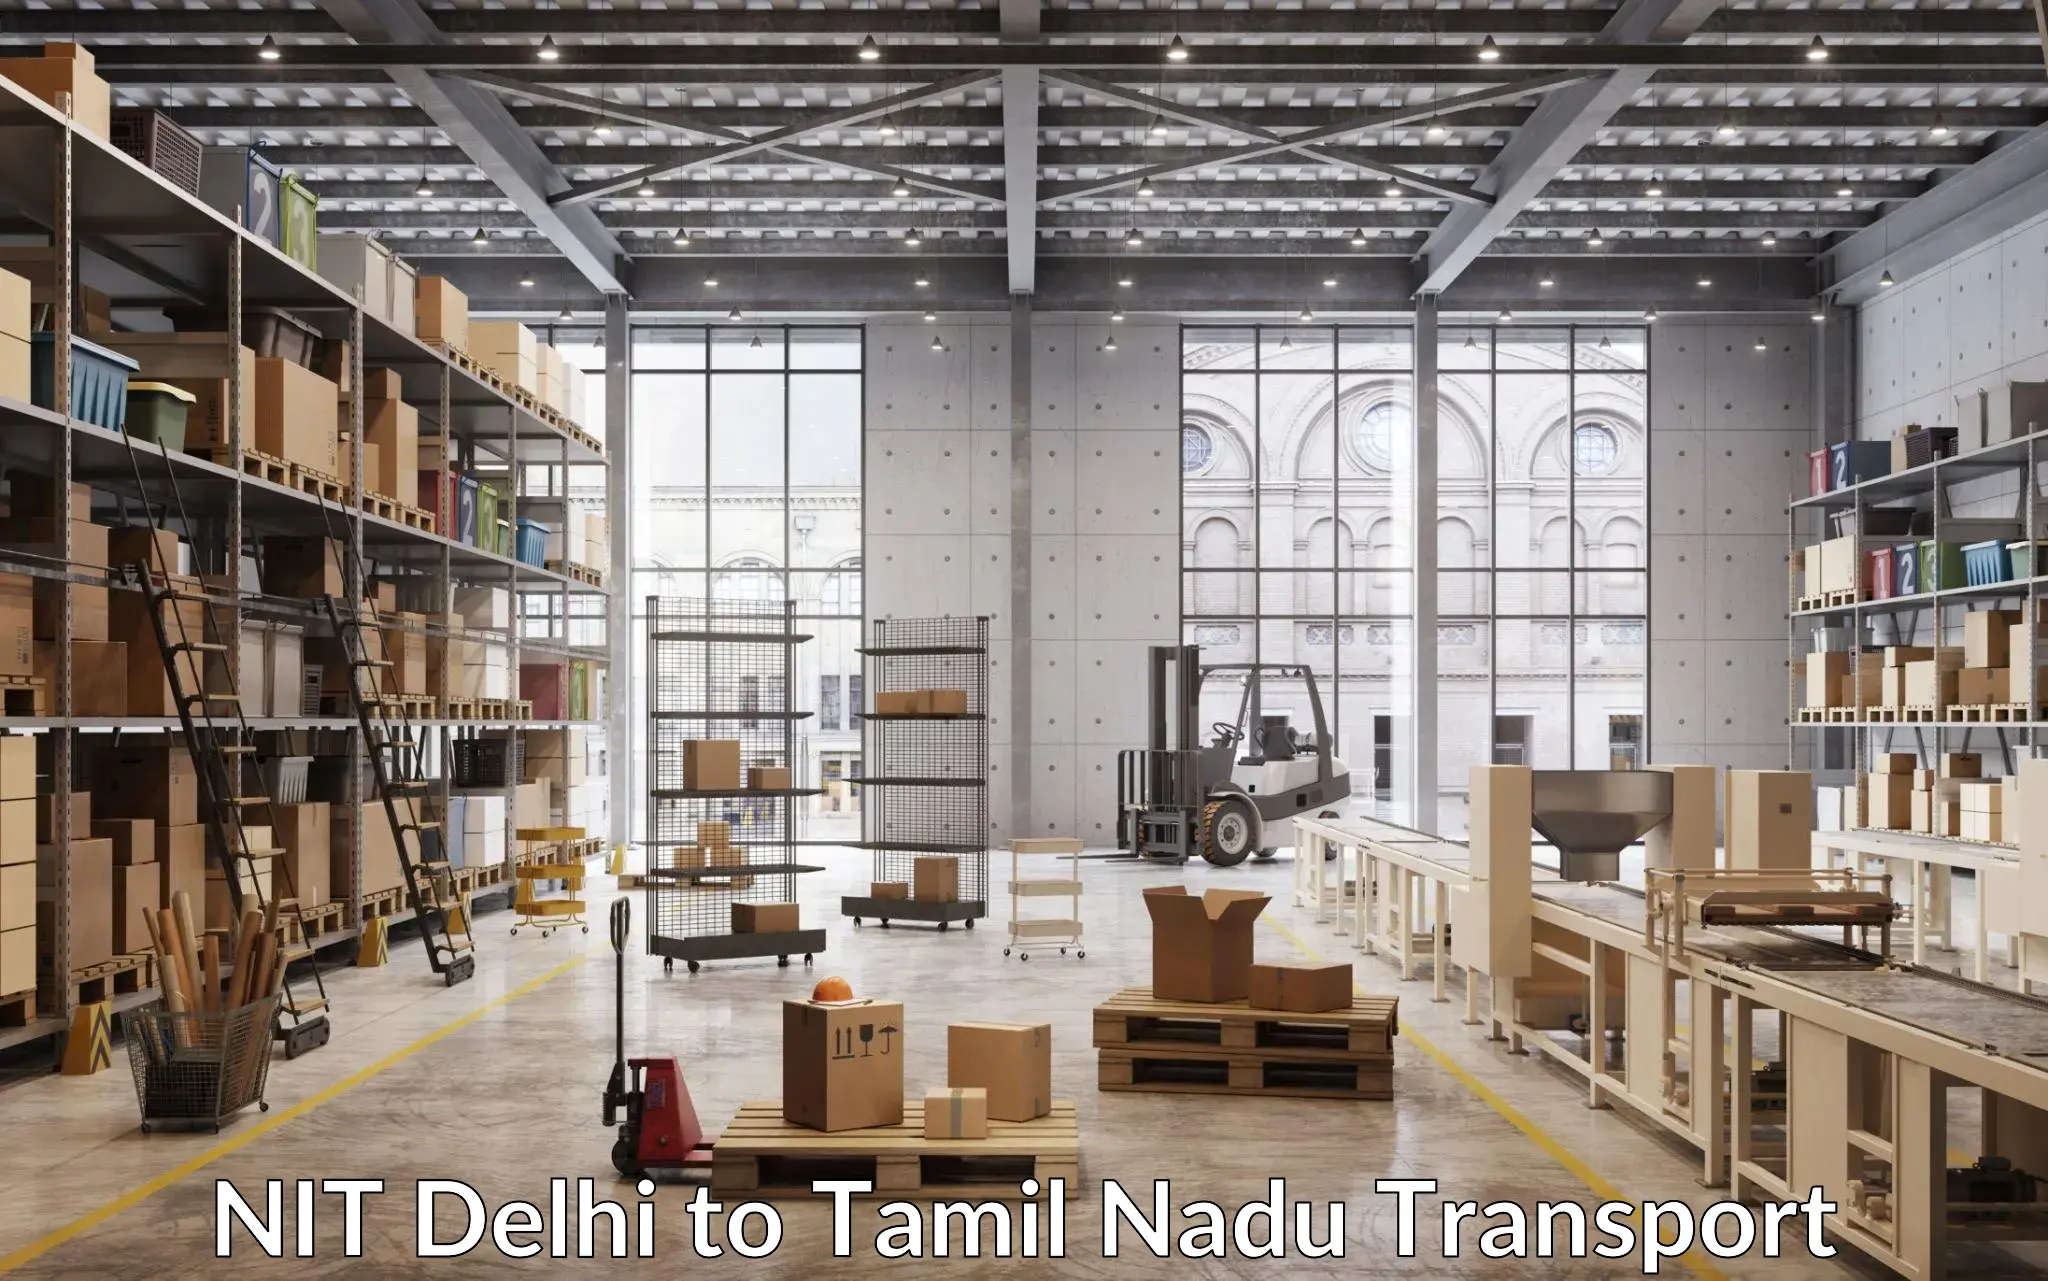 Nearby transport service NIT Delhi to Erode